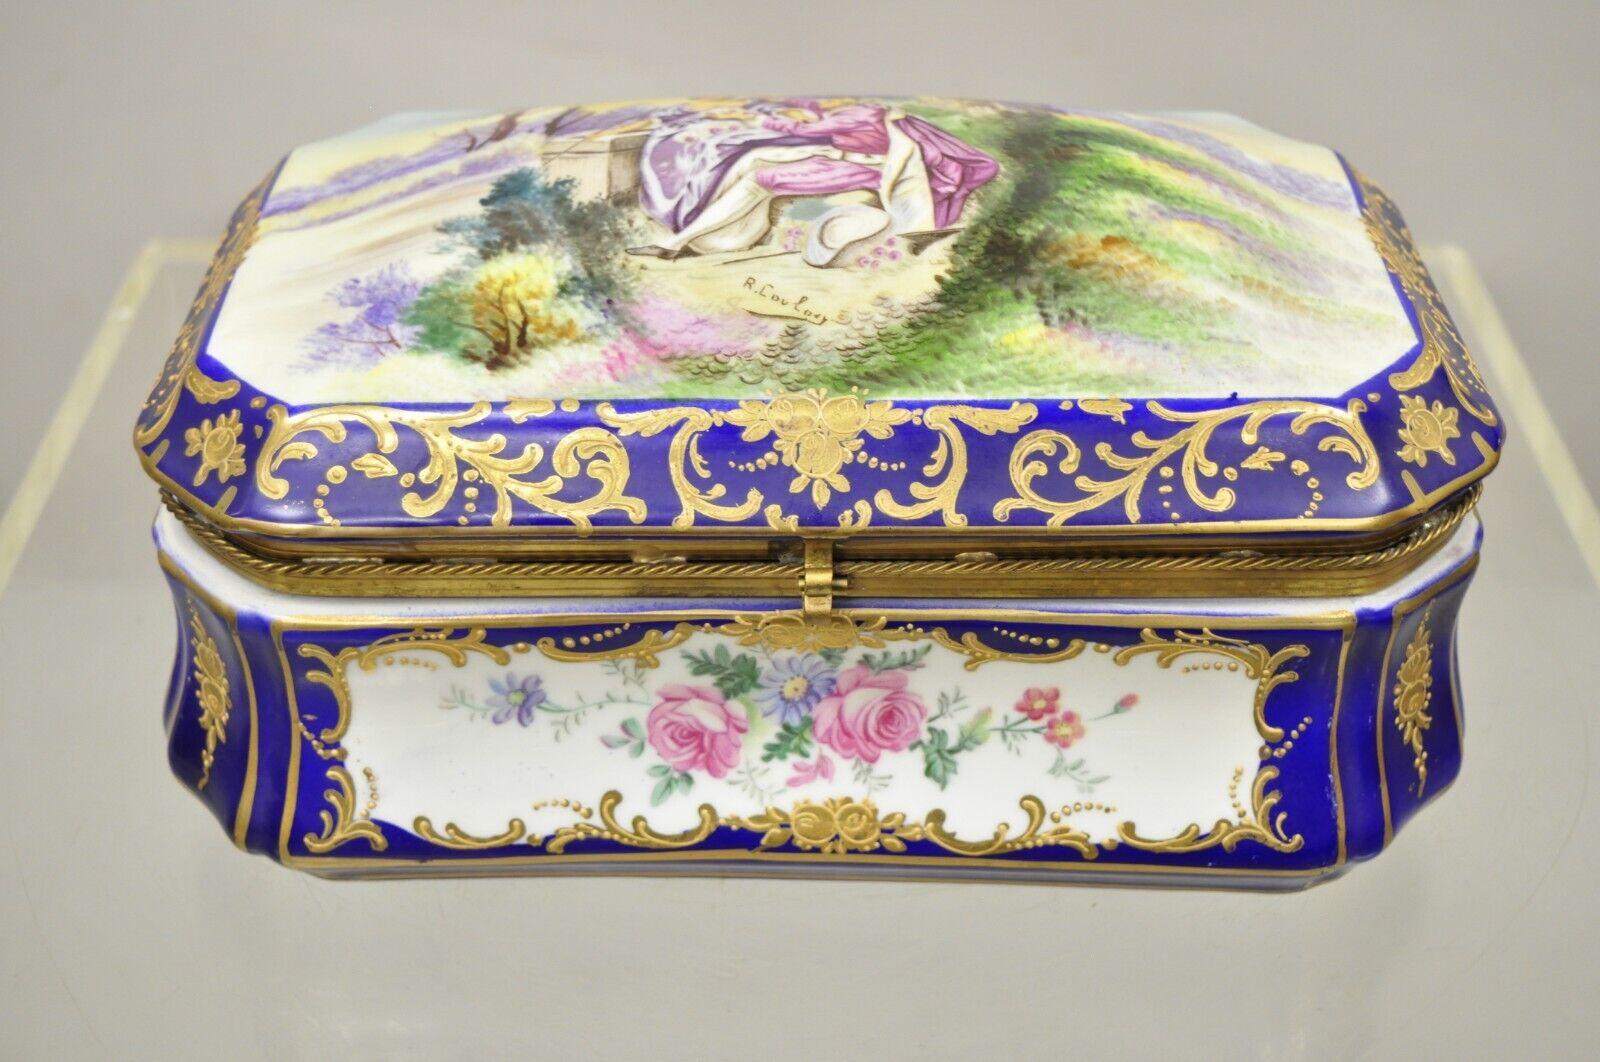 Vintage French Victorian Porcelain Hand Painted Hinged Box Signed R. Coulory For Sale 2